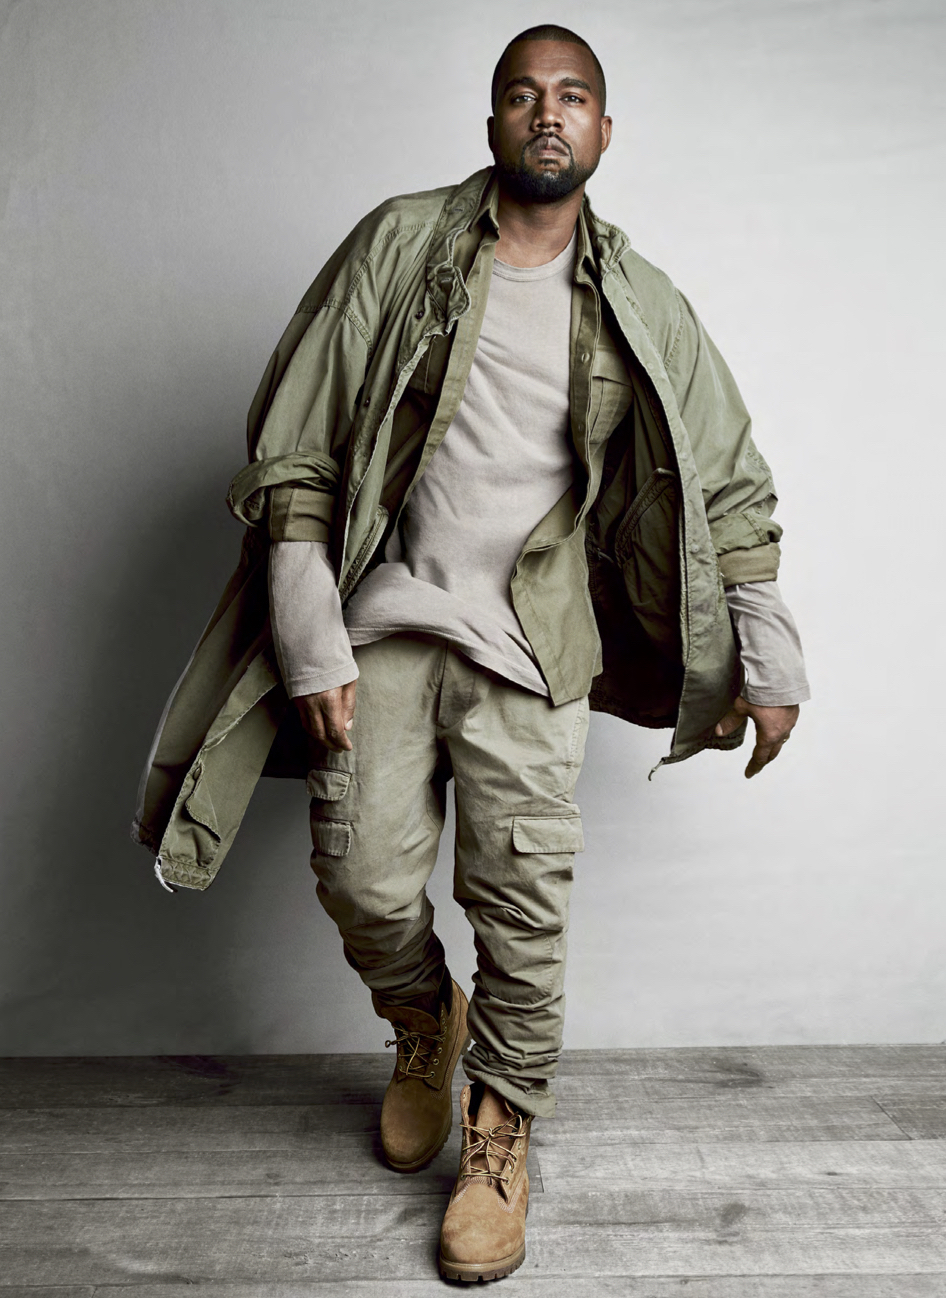 Jim Moore | My Friend Kanye | Kanye West by Patrick Demarchelier, 2014 | 2